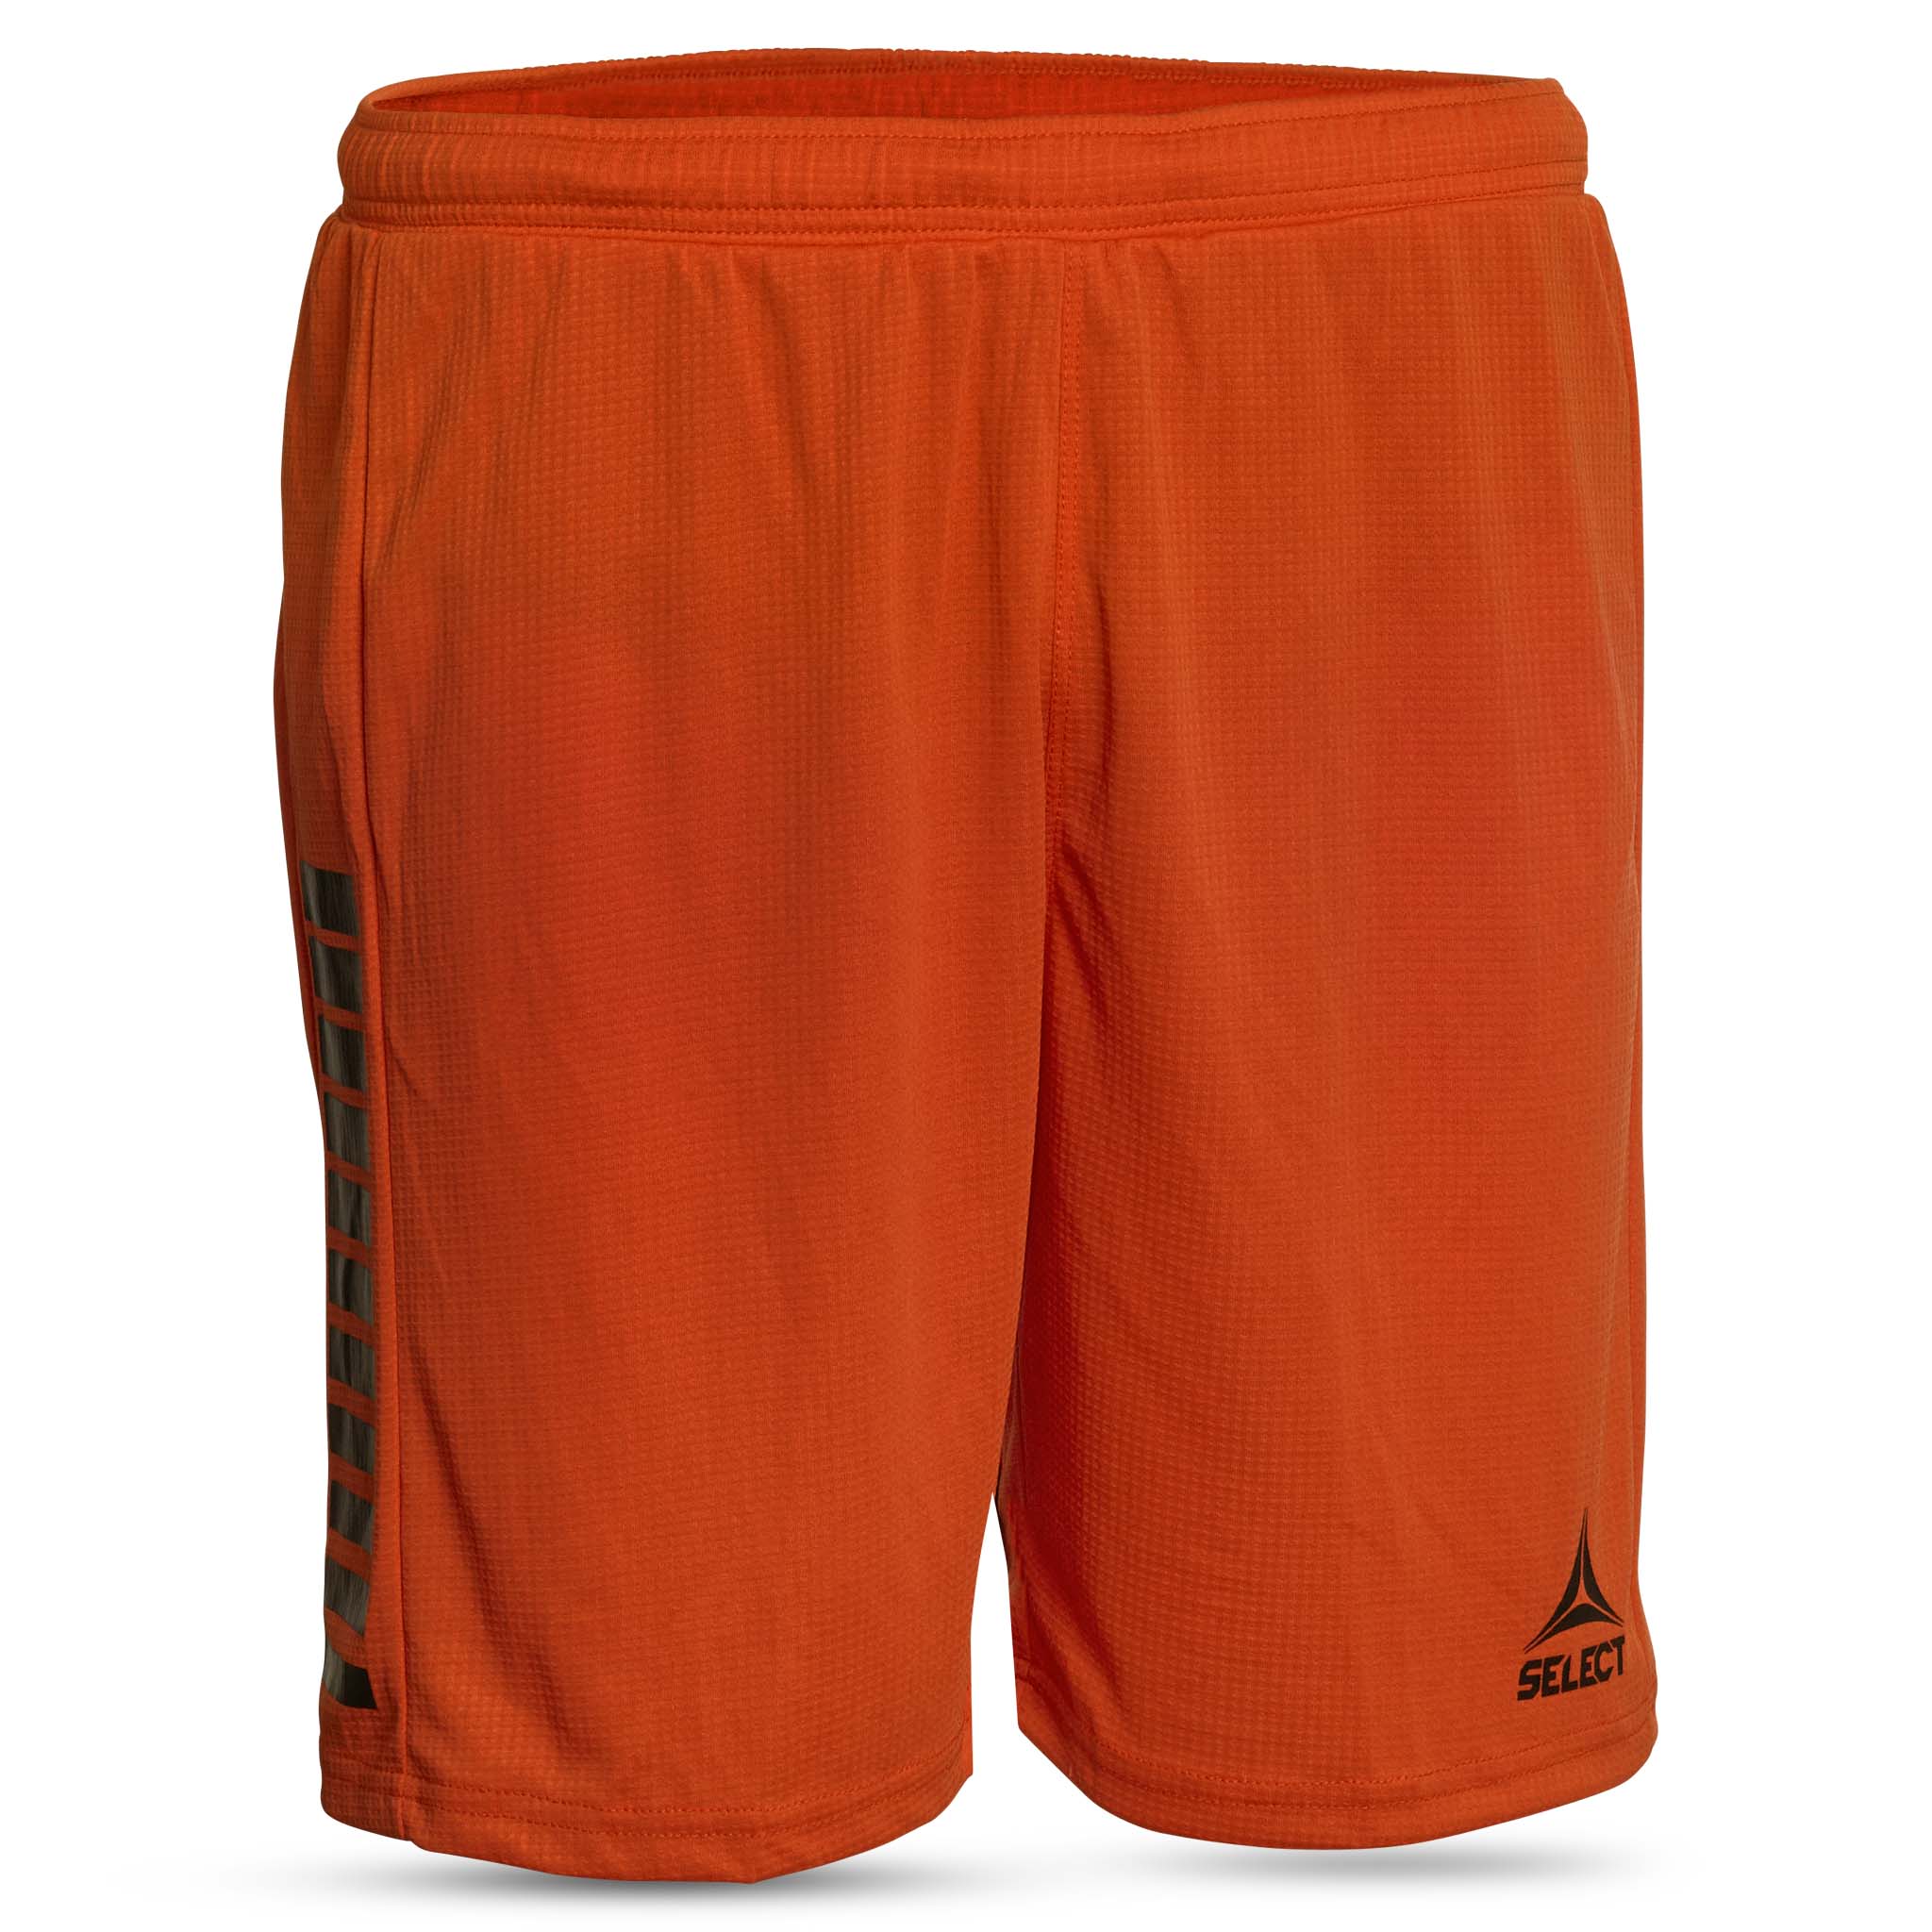 Goalkeeper shorts - Monaco, youth #colour_red